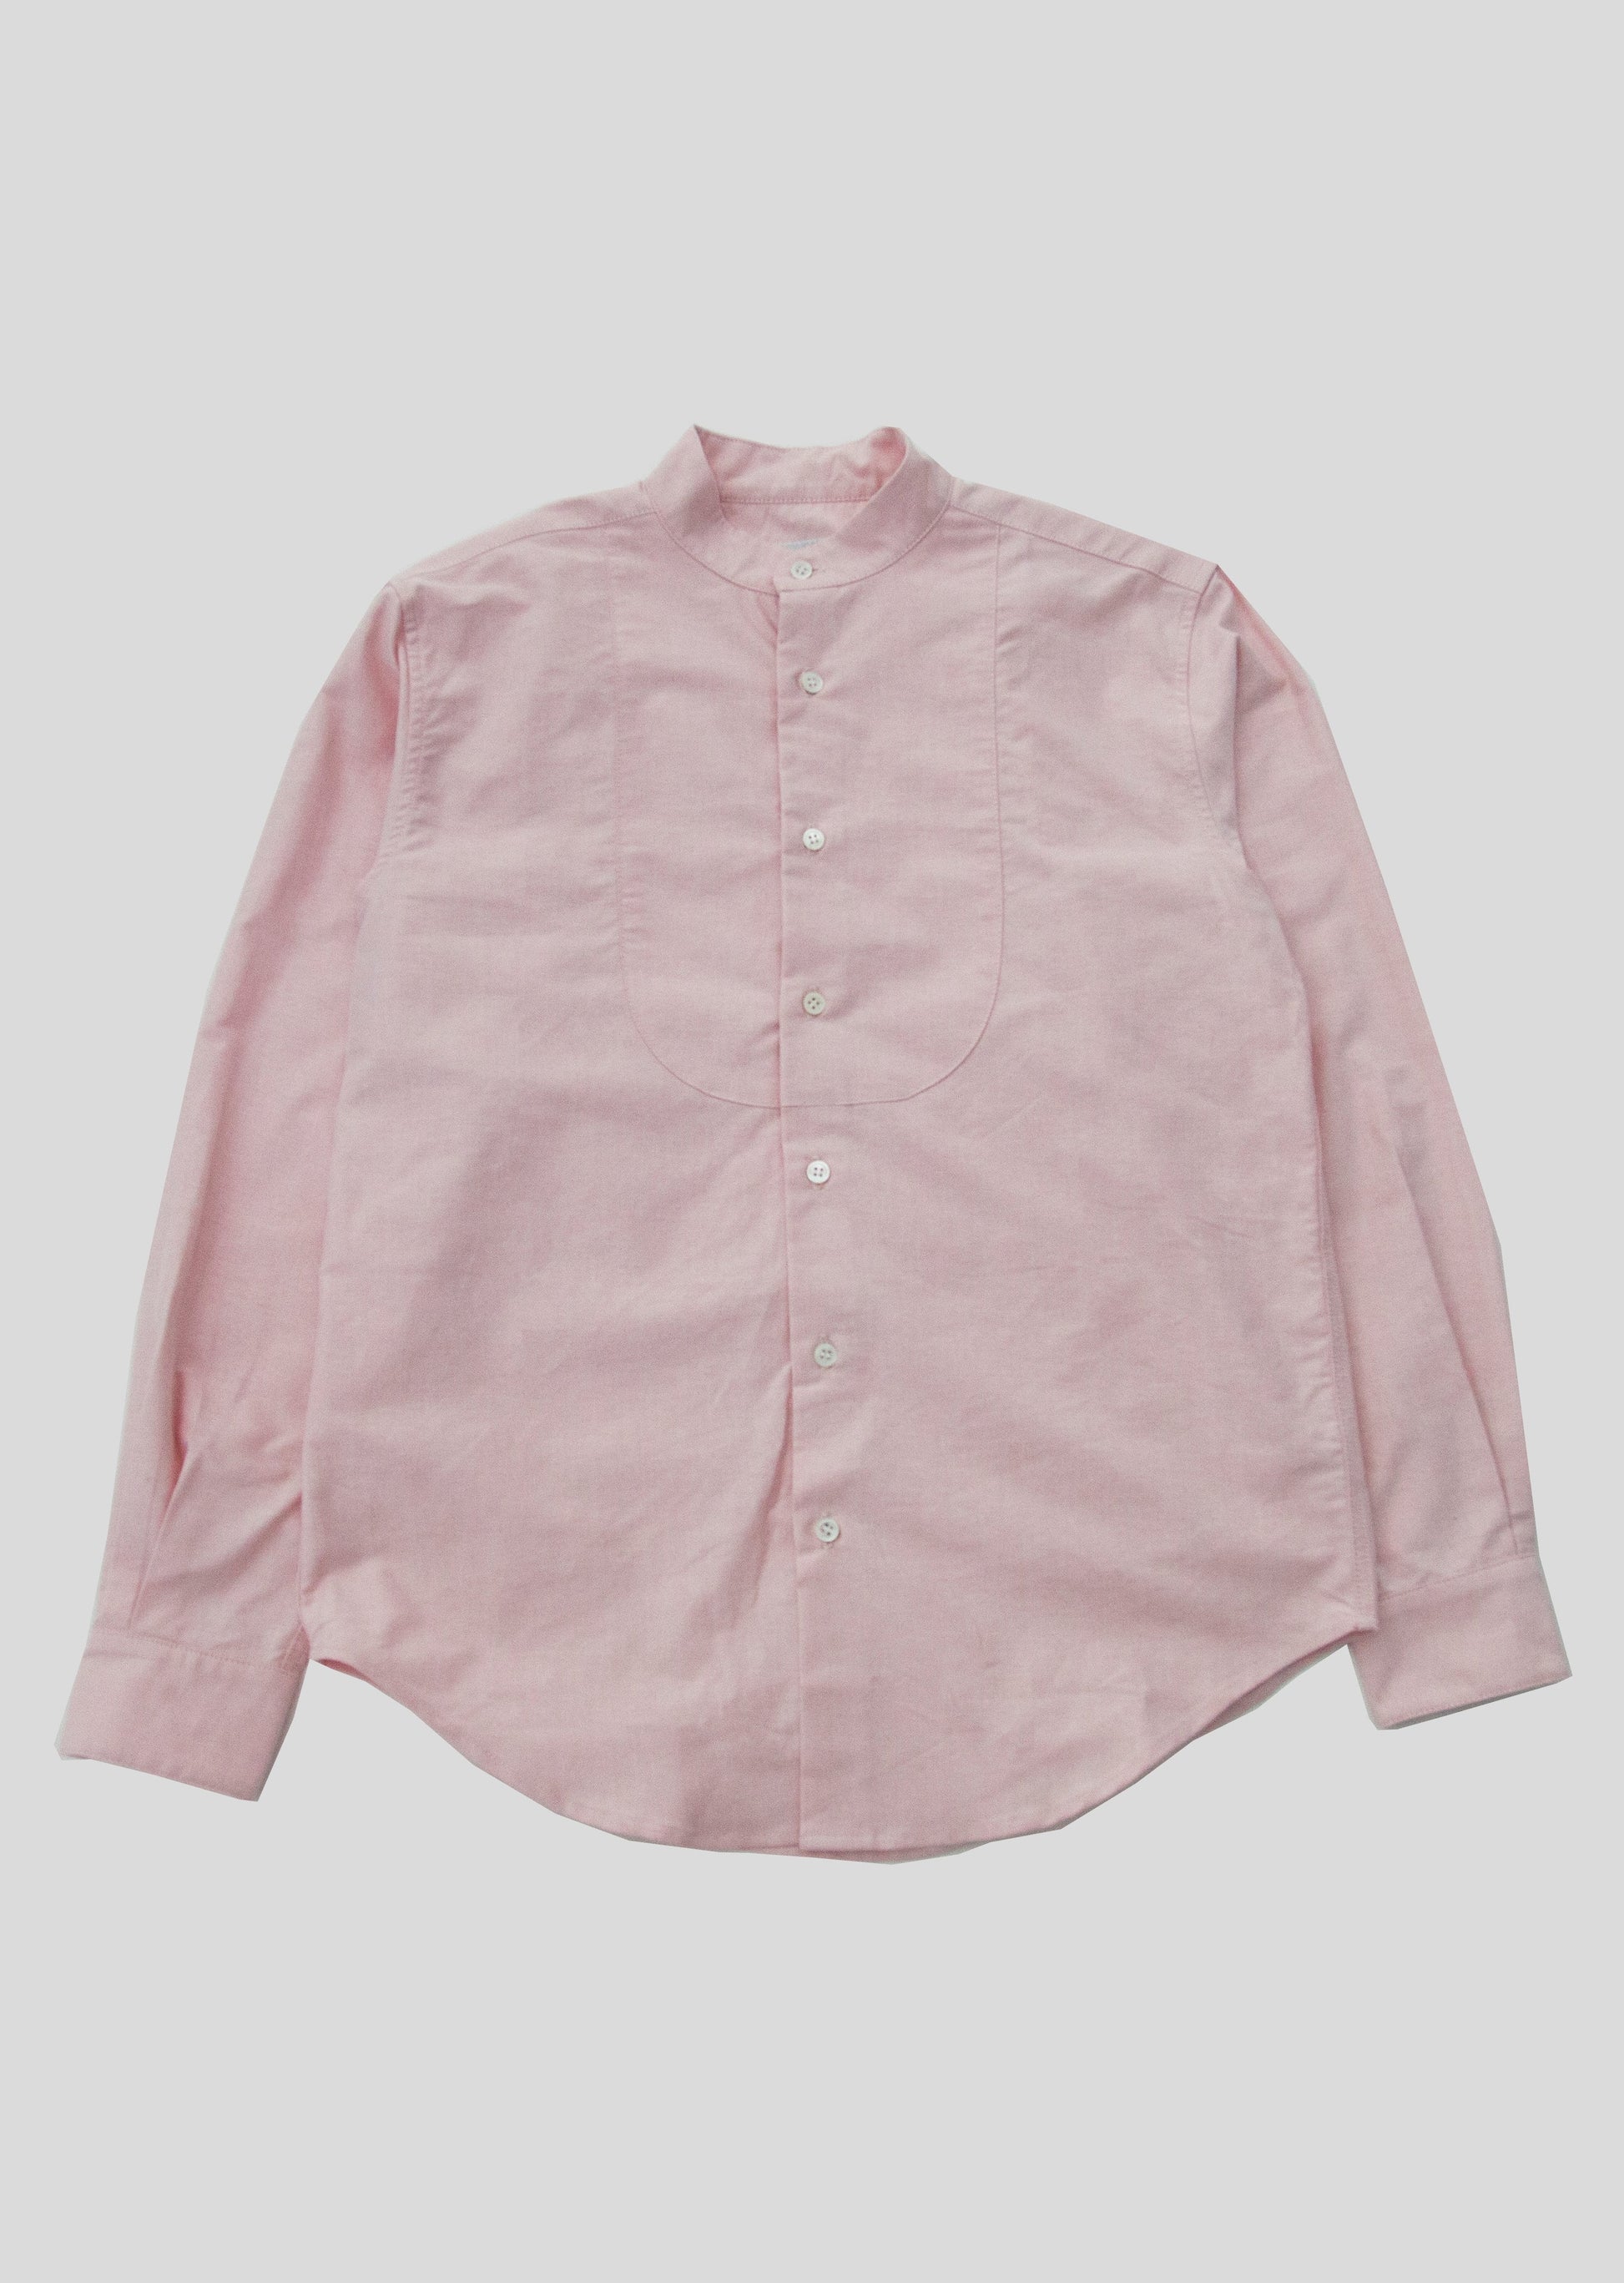 Tux shirt in salmon oxford flay lay front